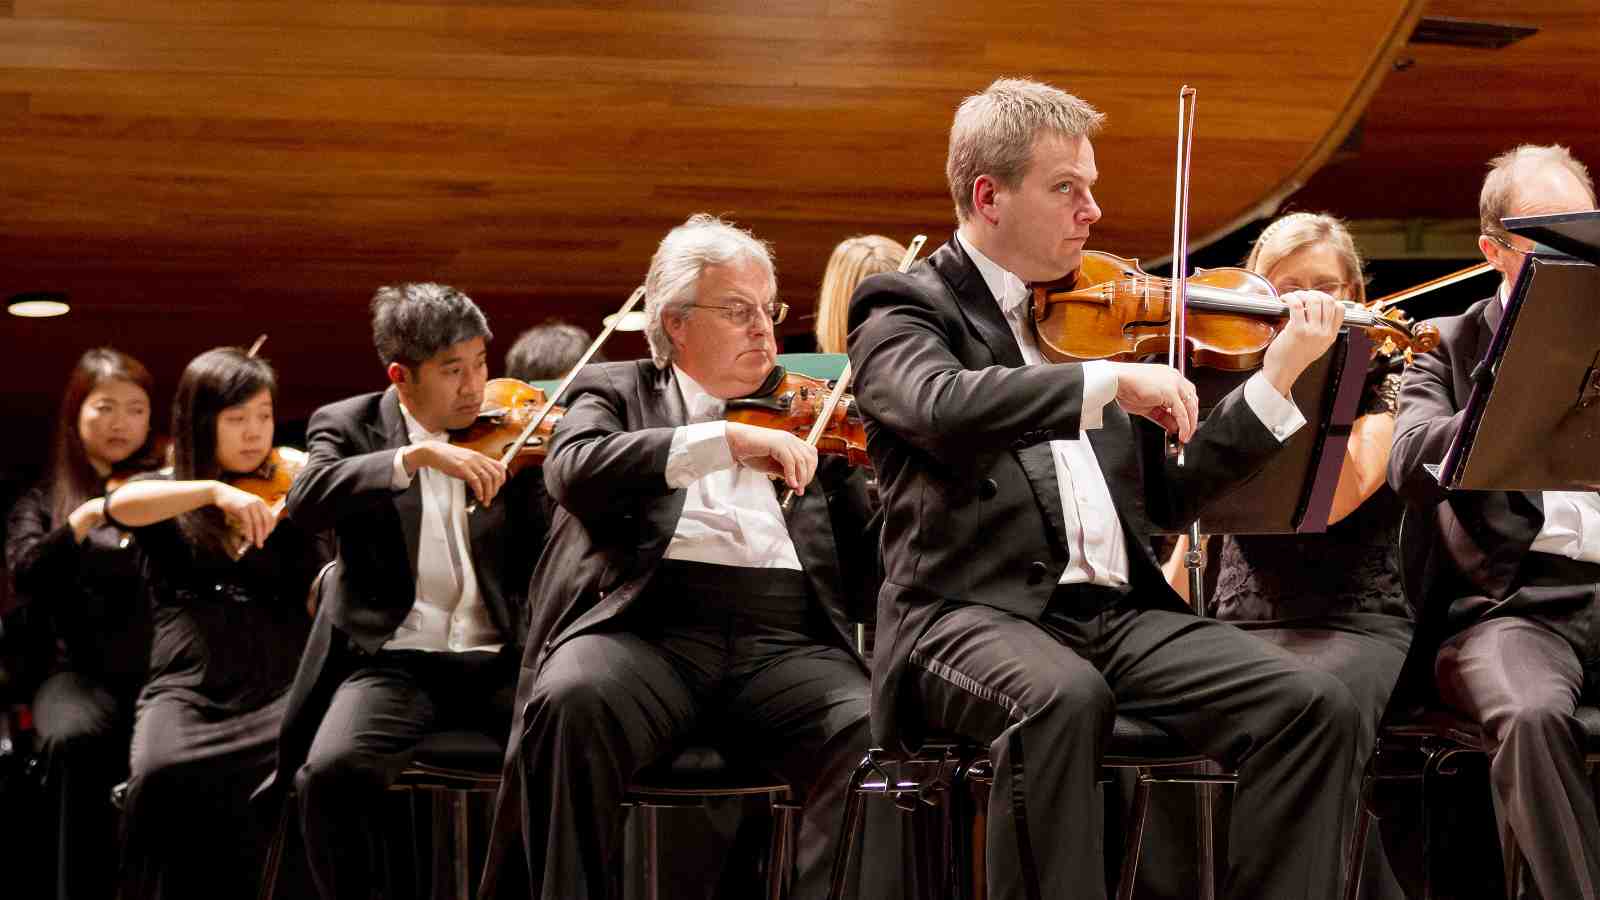 New Zealand Symphony Orchestra playing string instruments at a performance